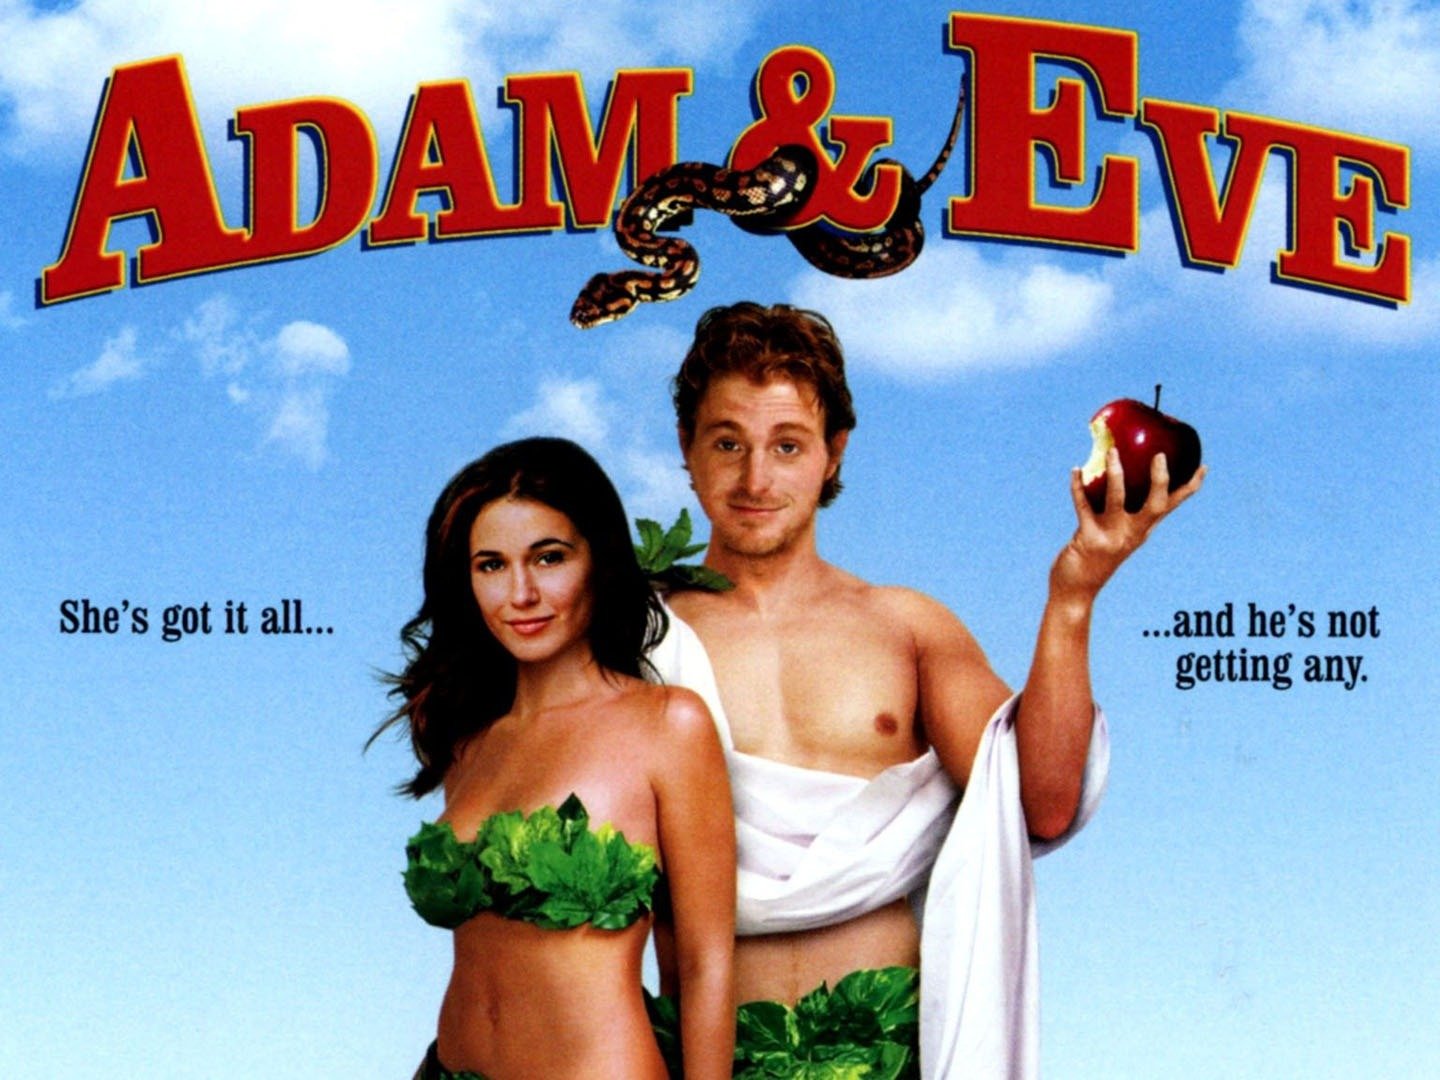 Comedy: Senseless Cinema If I M Not Mistaken They Want To Hurt Us Adam And Eve...